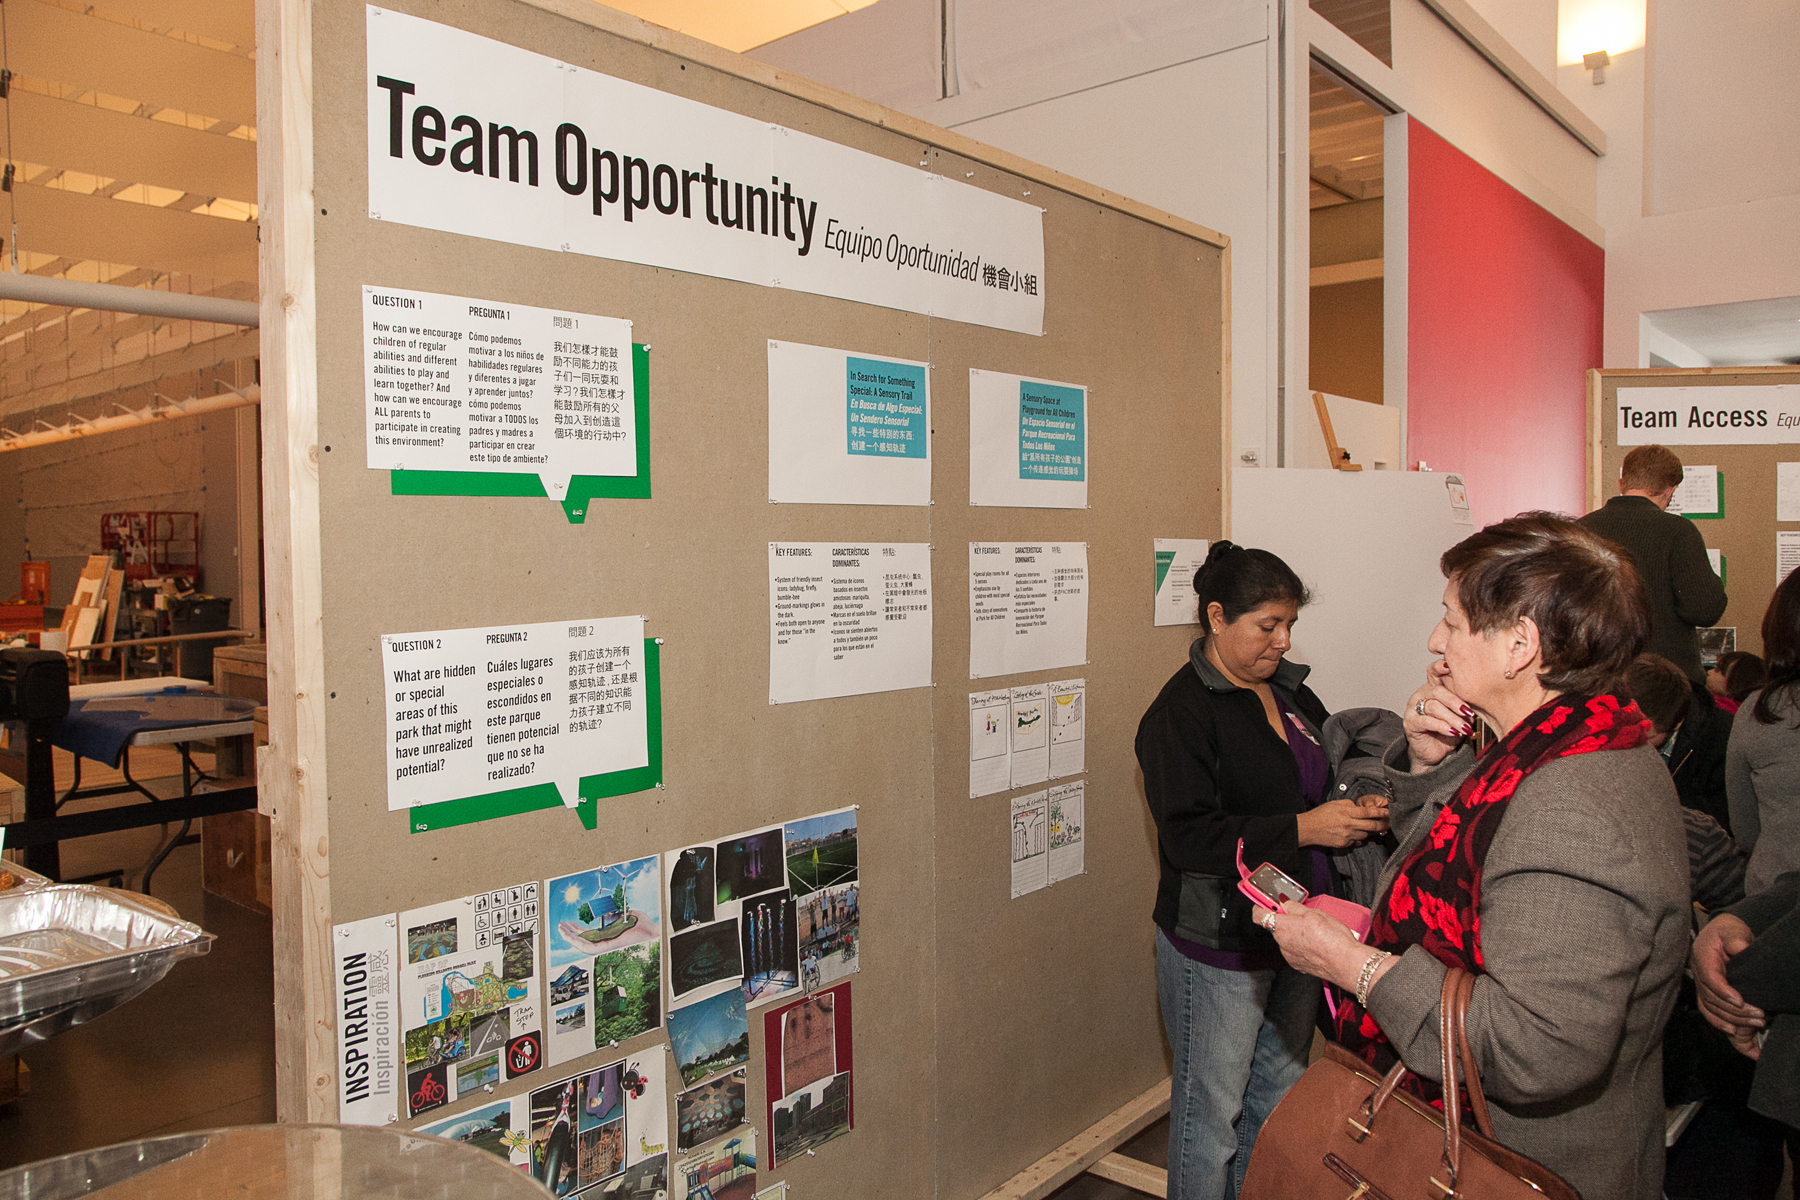 A bulletin board with text and images. At the top in large letters reads “Team Opportunity” in three languages. Below that are call out boxes with community questions and an inspiration mood board.